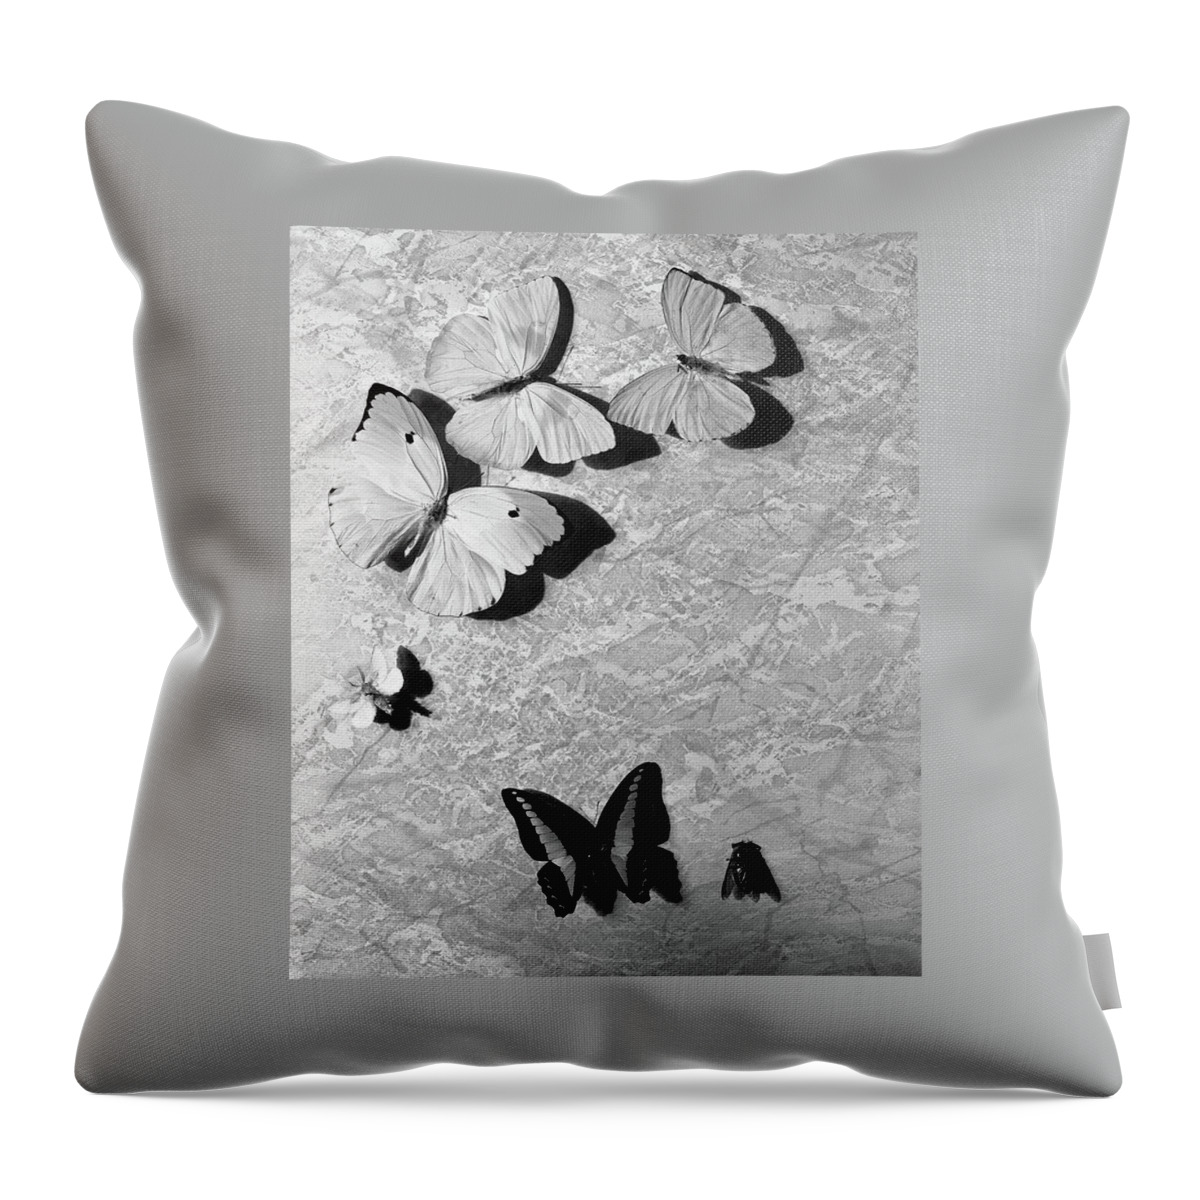 Still-life Of Butterfly Stage Props Throw Pillow